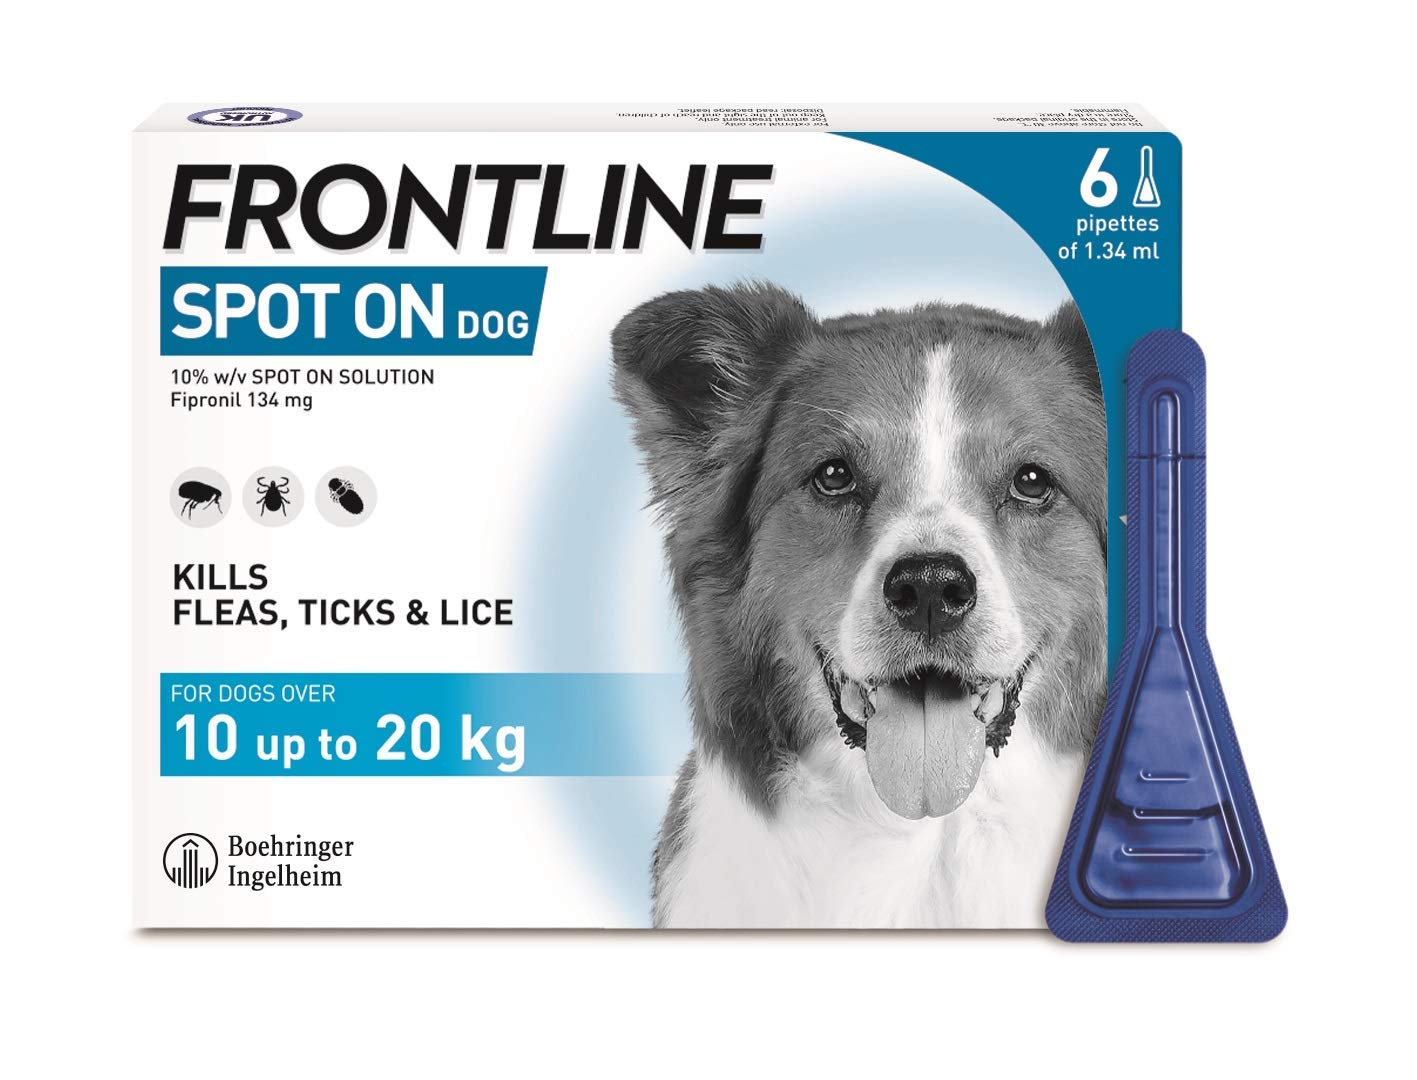 How does Frontline spot on dog work?